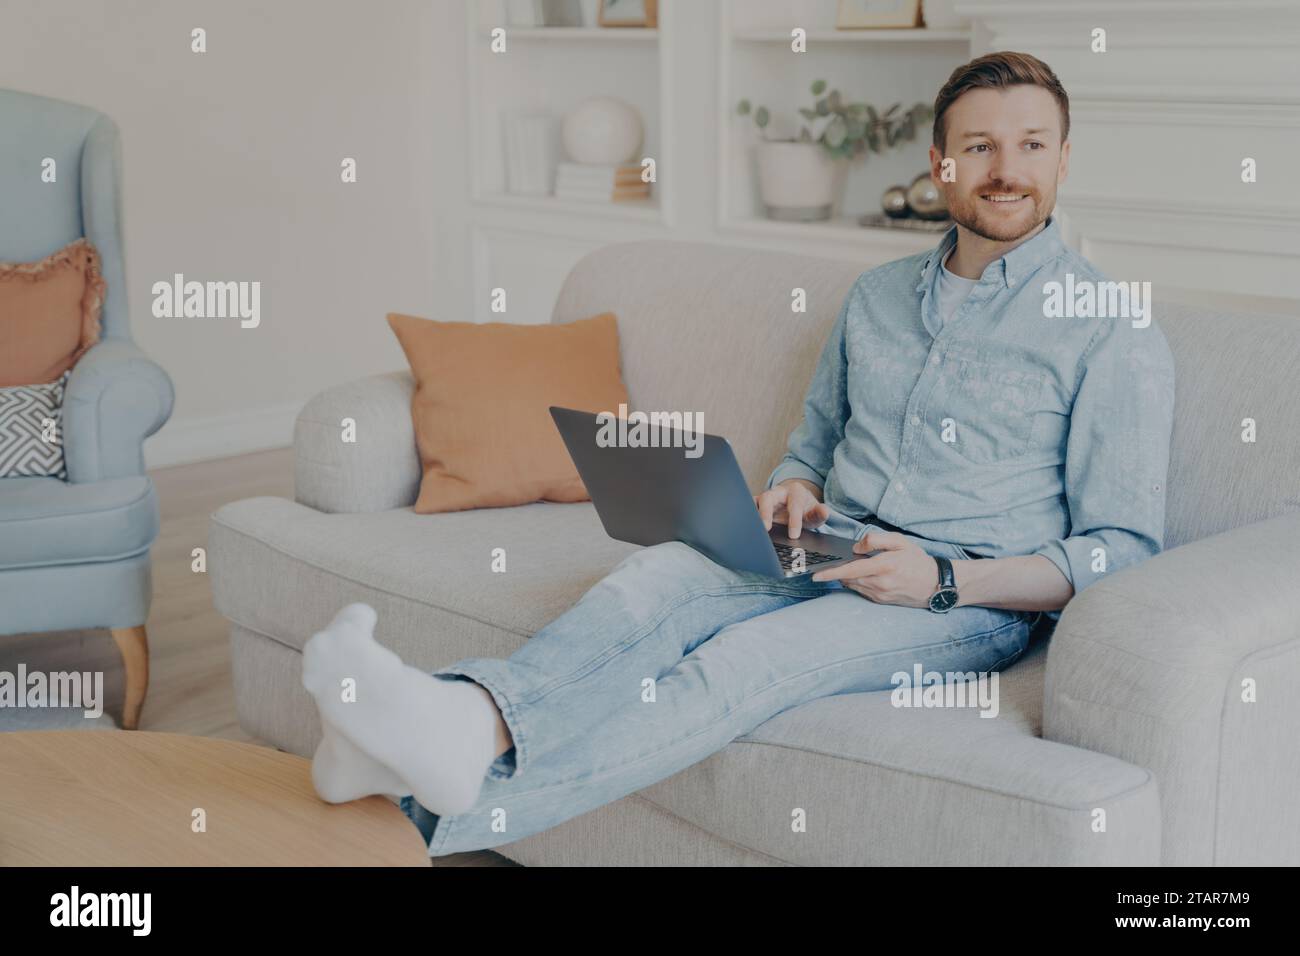 Smiling man working on laptop while sitting comfortably on a sofa in a cozy living room Stock Photo